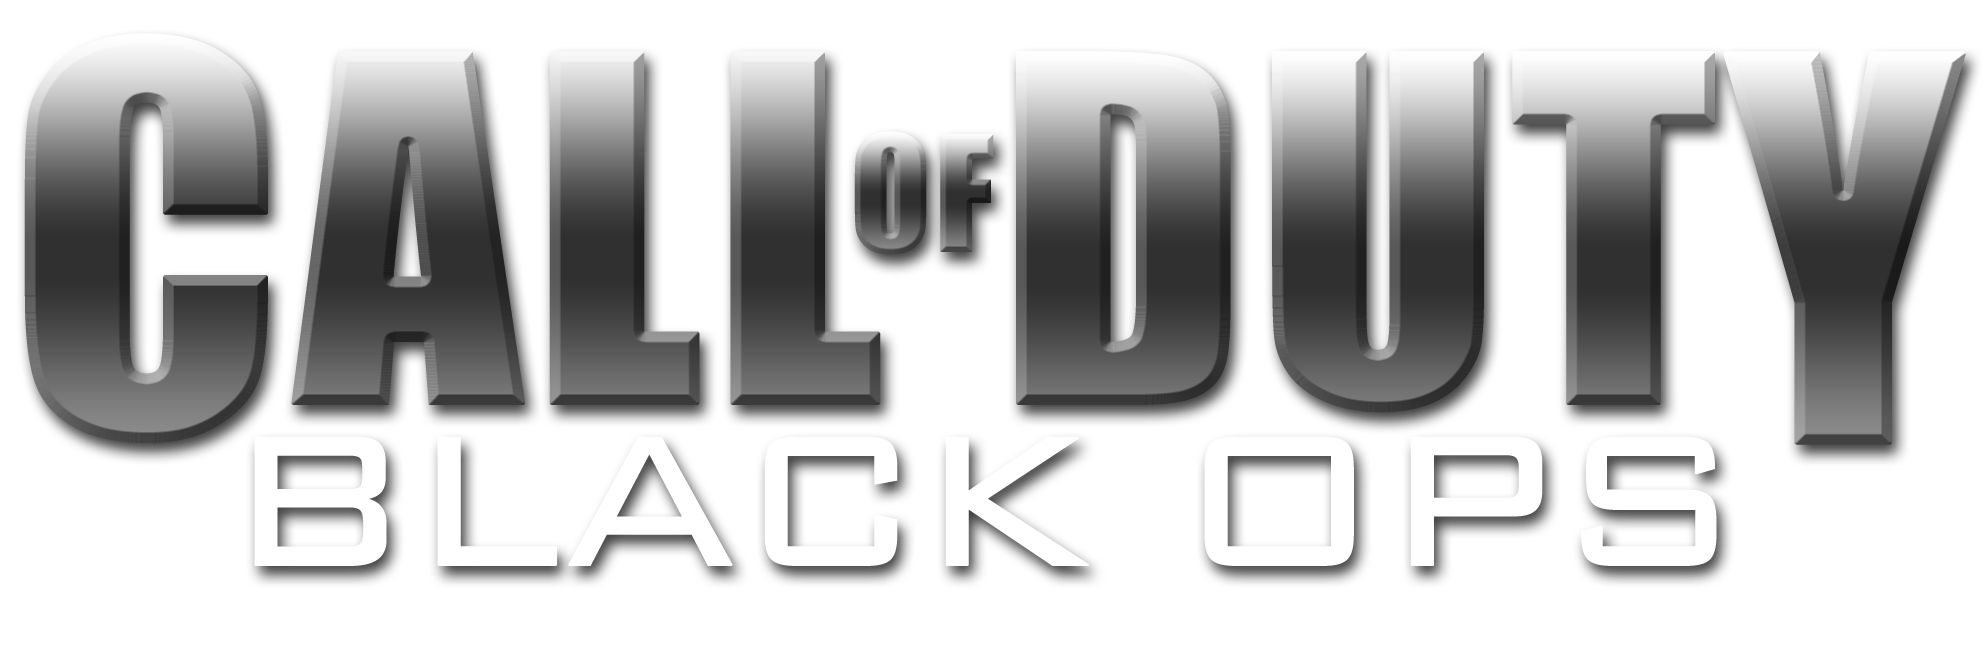 Call of Duty PNG image free Download 